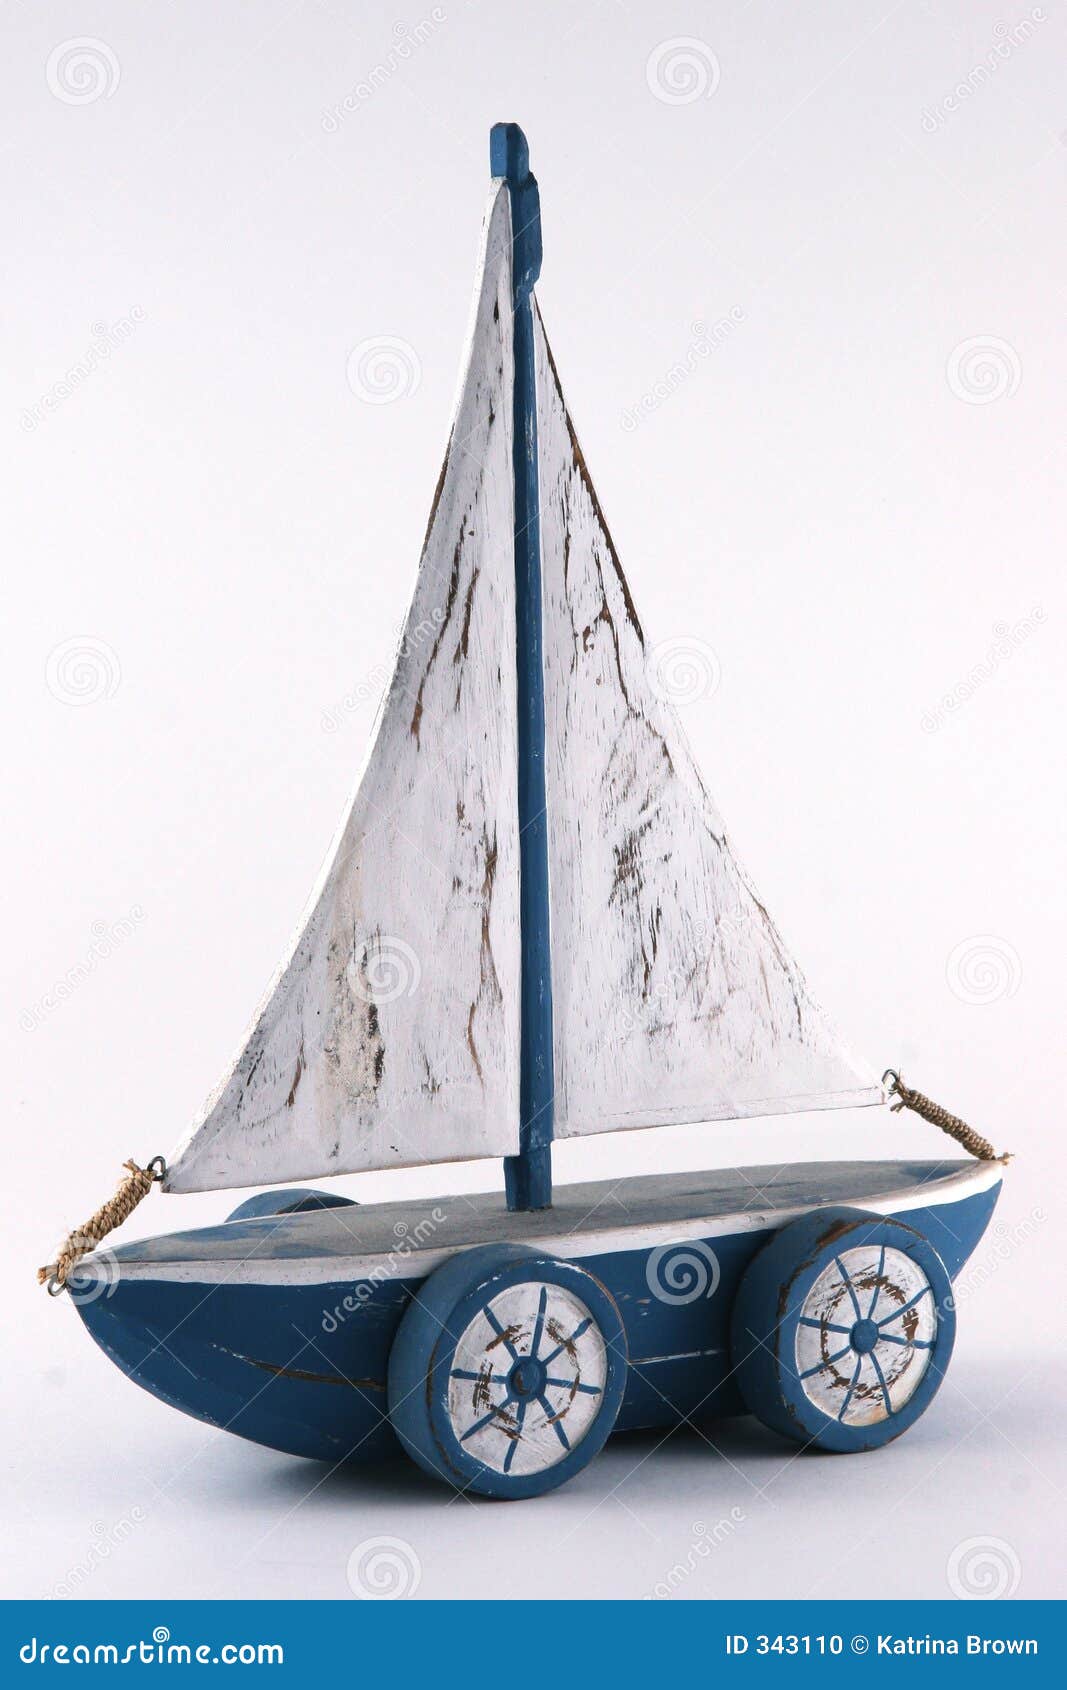 Wooden Toy Boat Plans Toy wooden sailboat plans